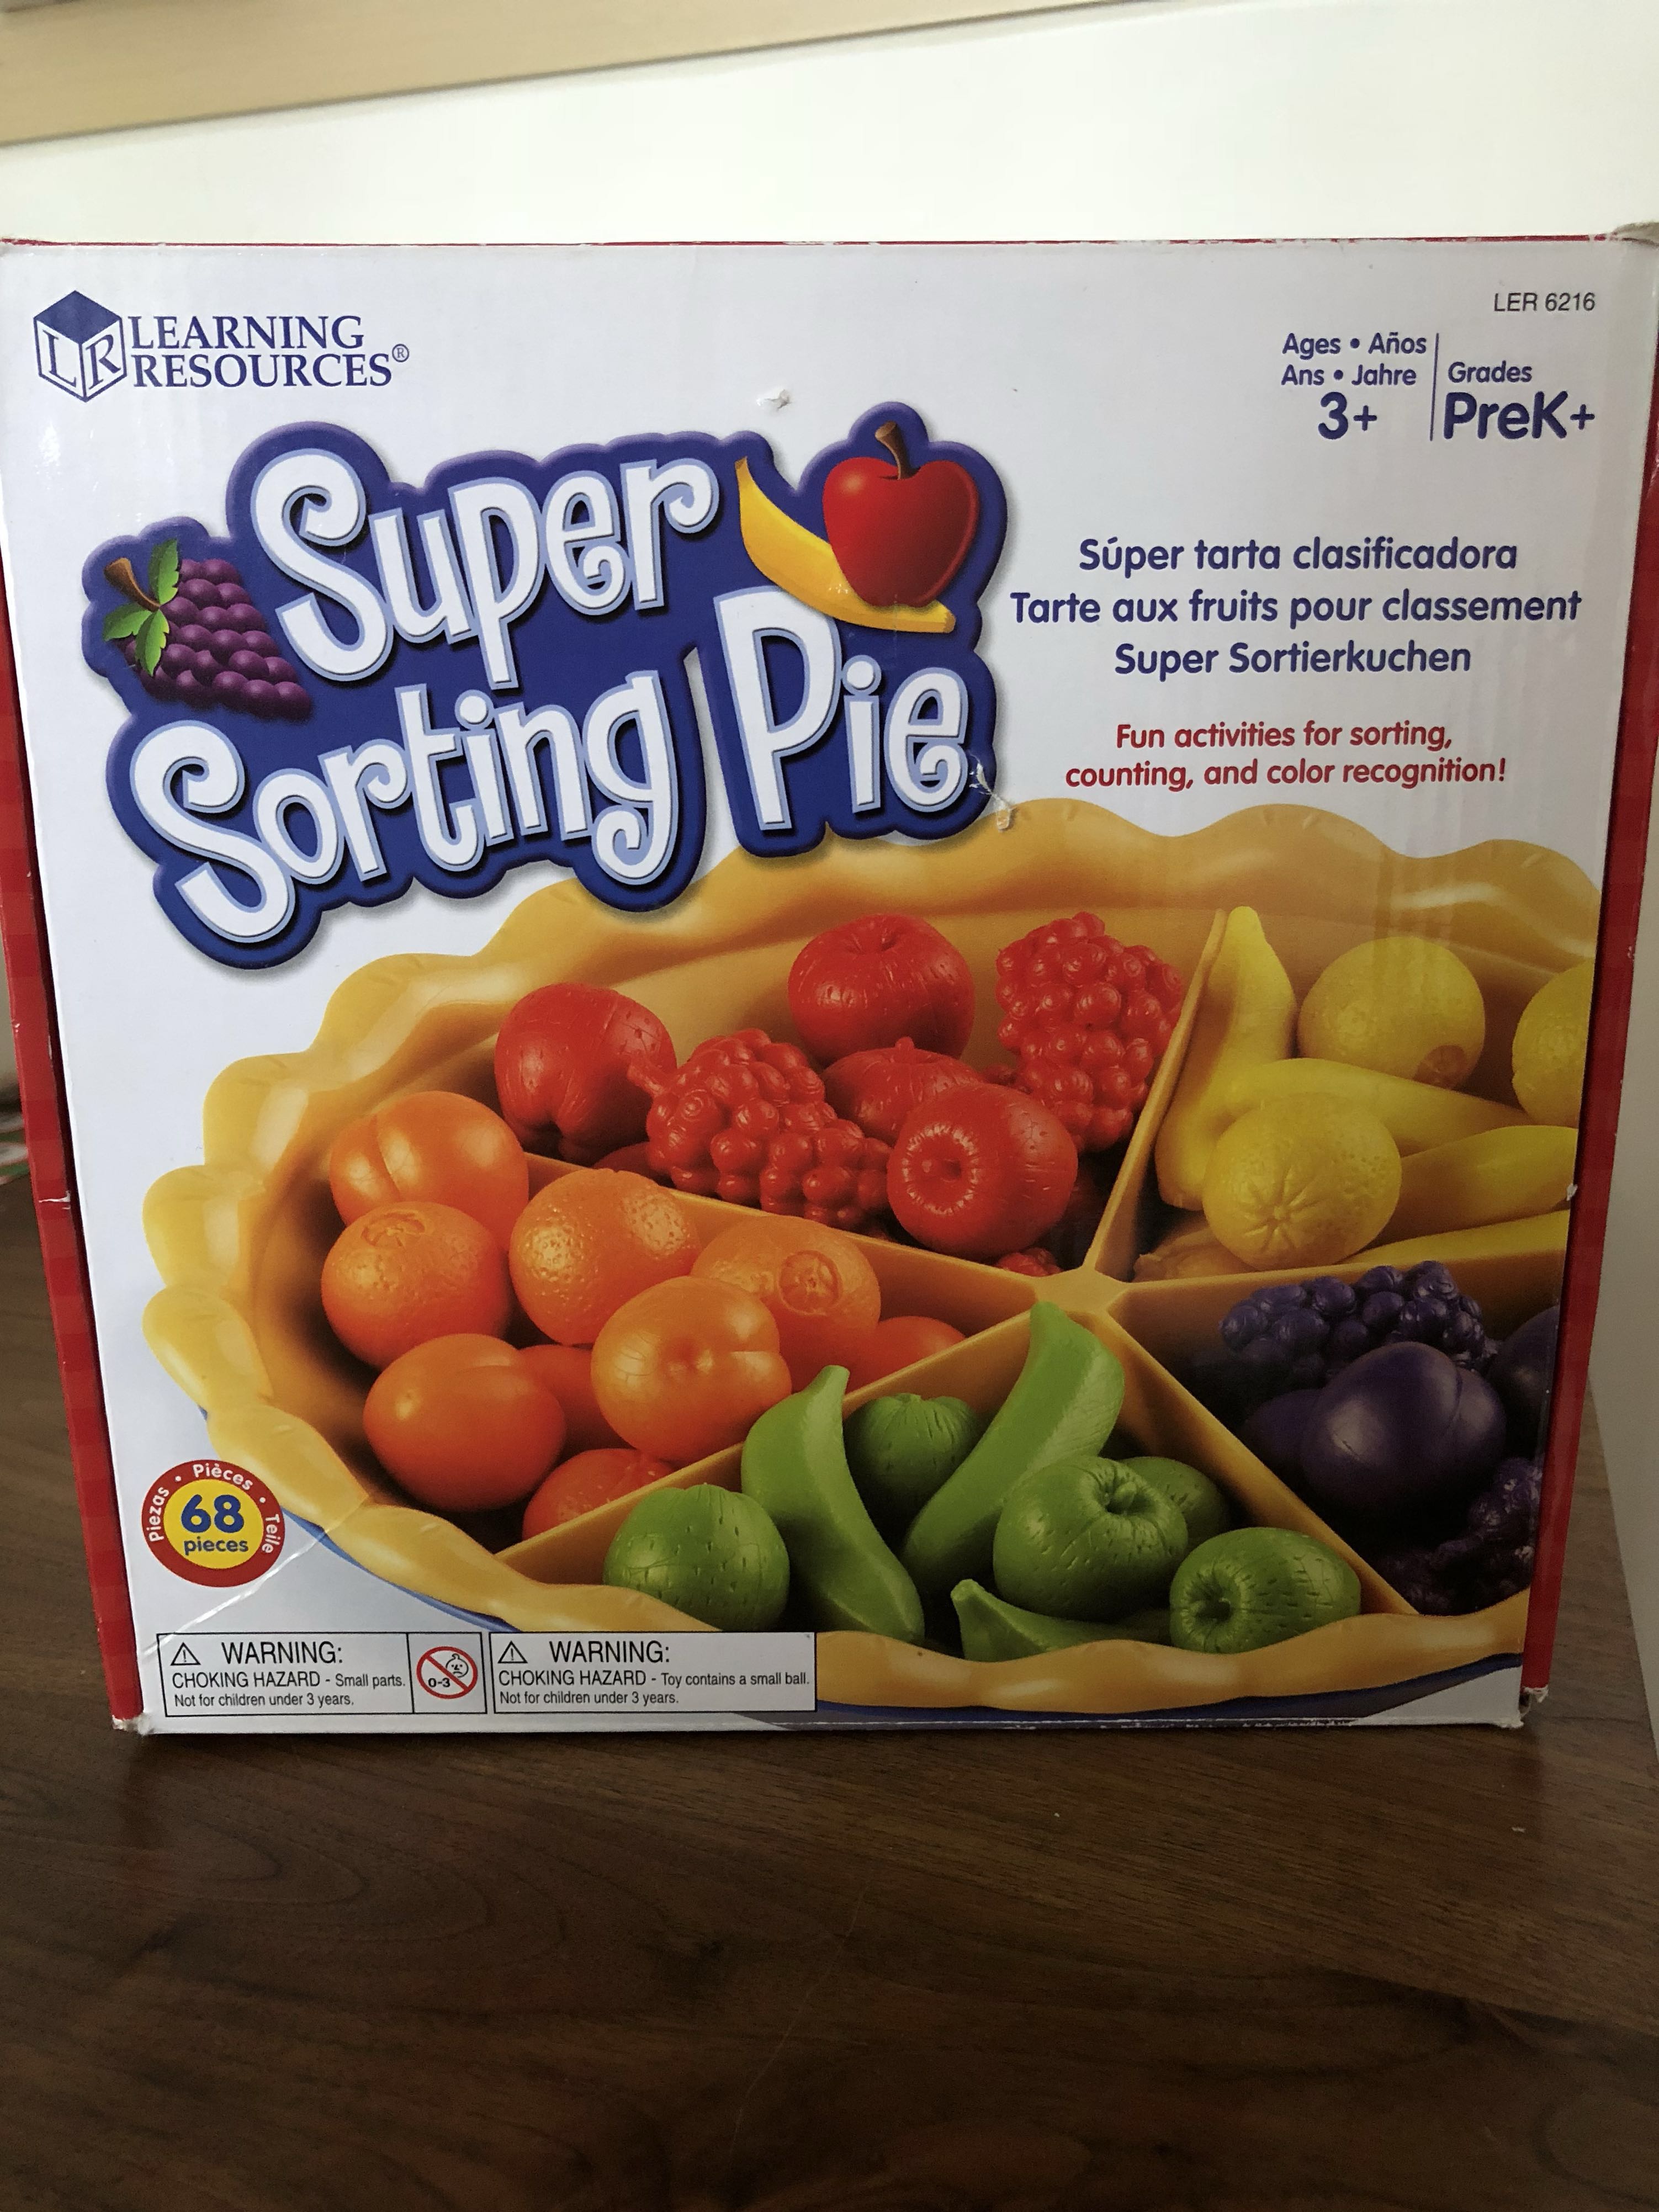 sorting pie toy